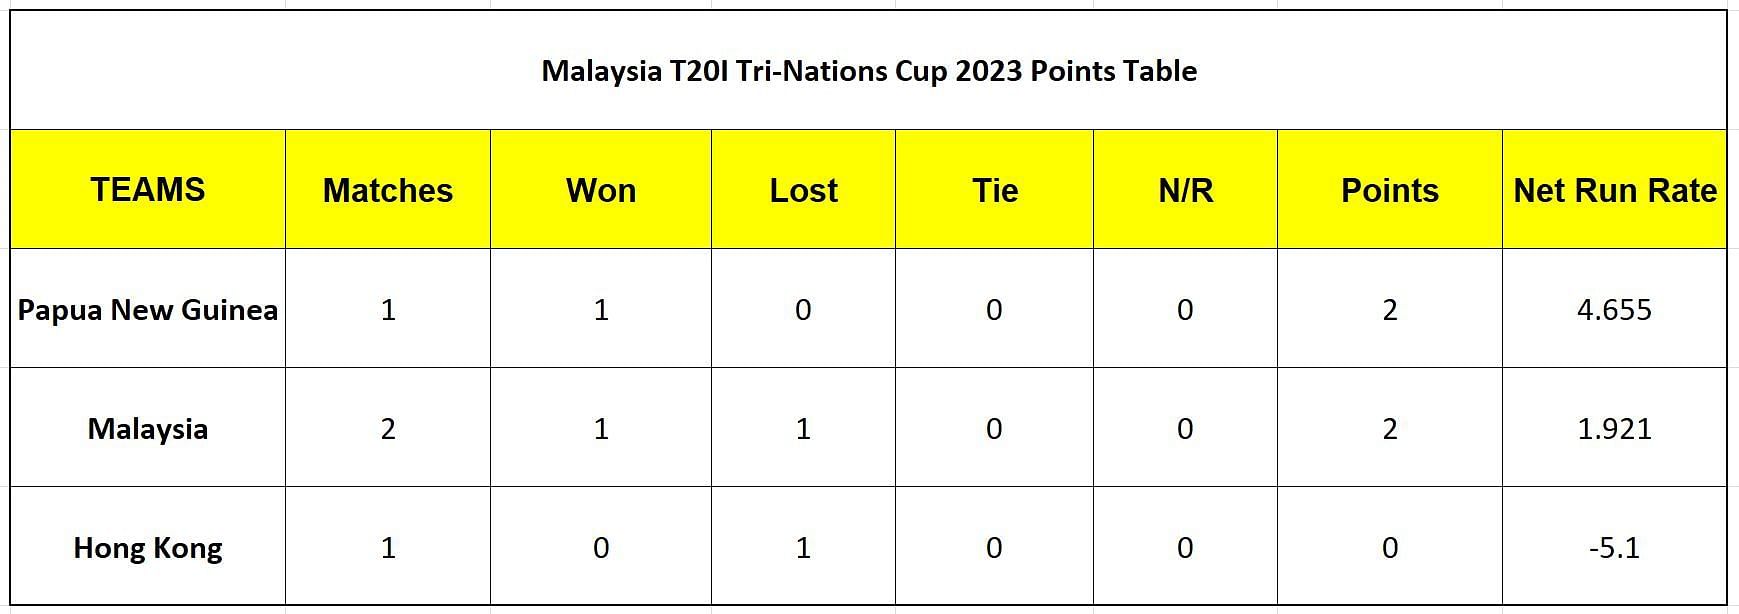 Malaysia T20I Tri-Nation Cup 2023 Points Table